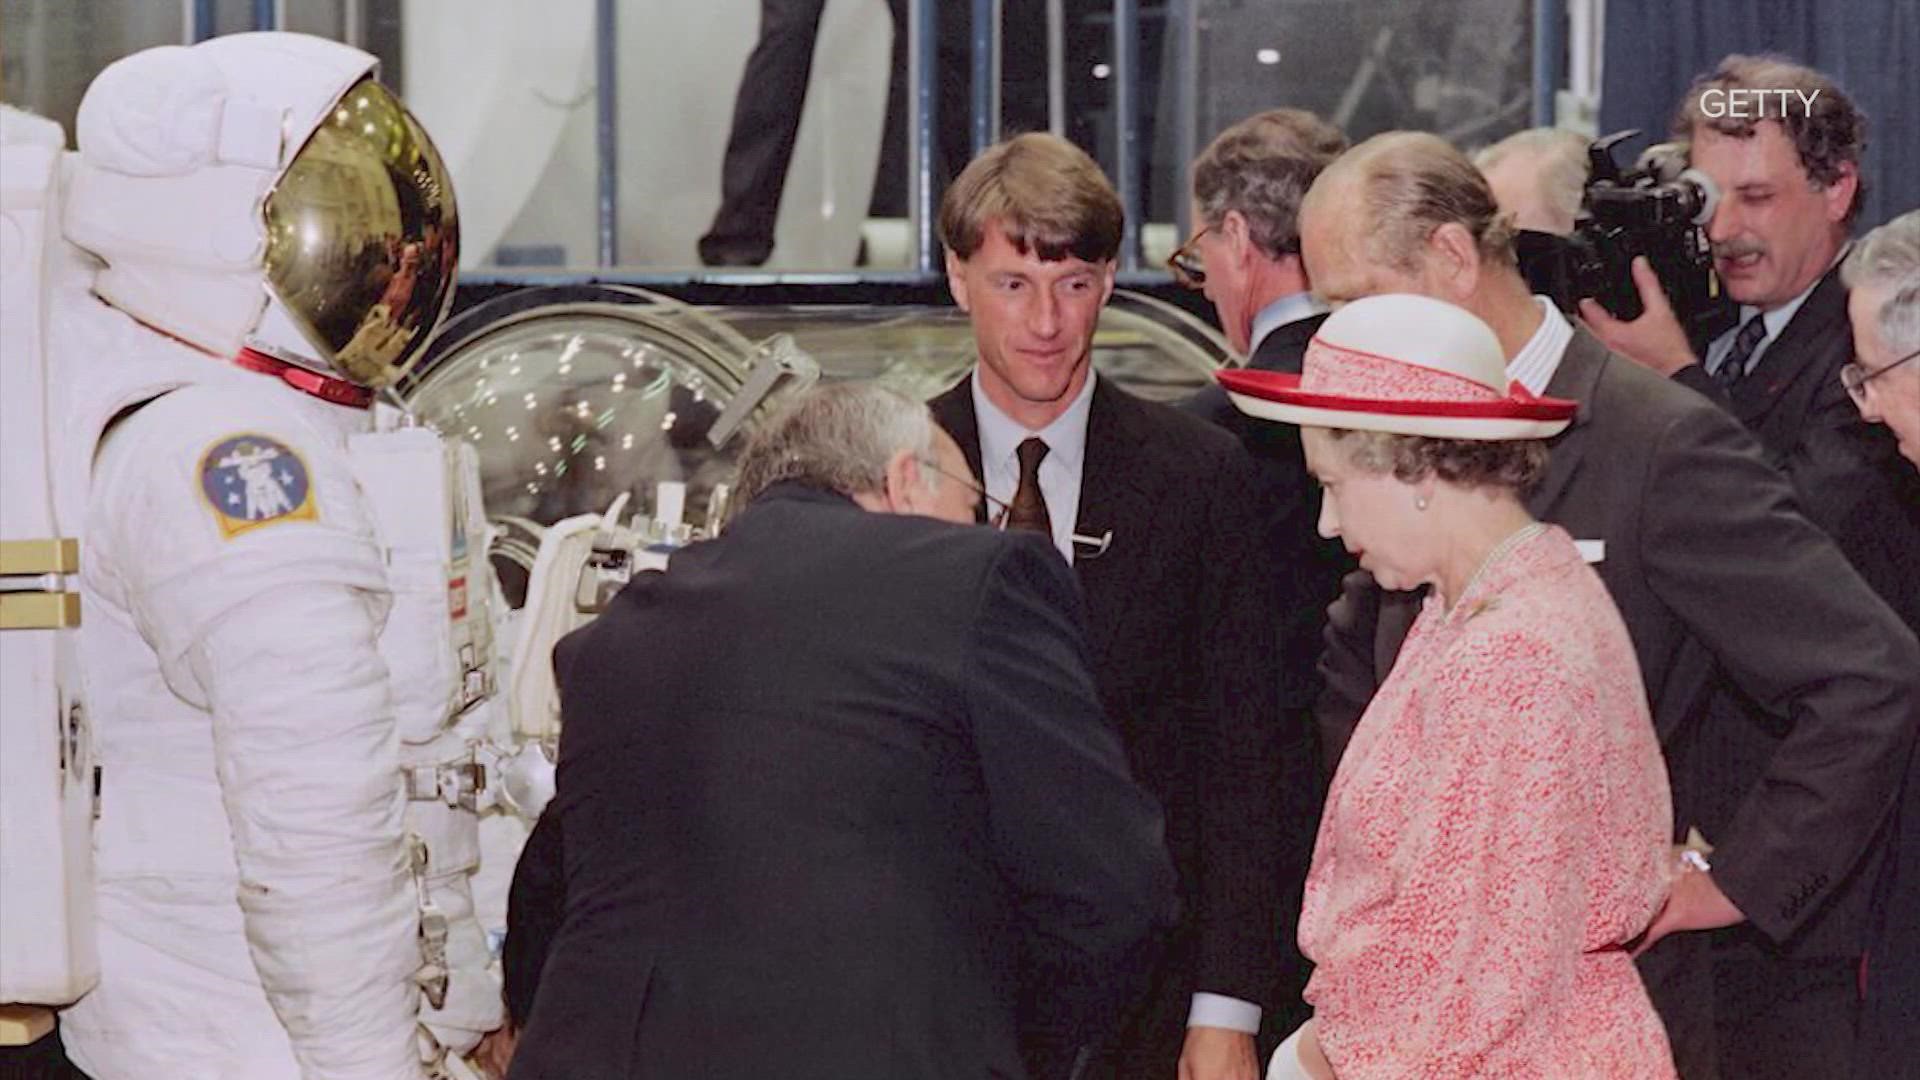 Queen Elizabeth II made history in 1991 when she toured Texas, becoming the first sitting British monarch to visit the Lone Star State.